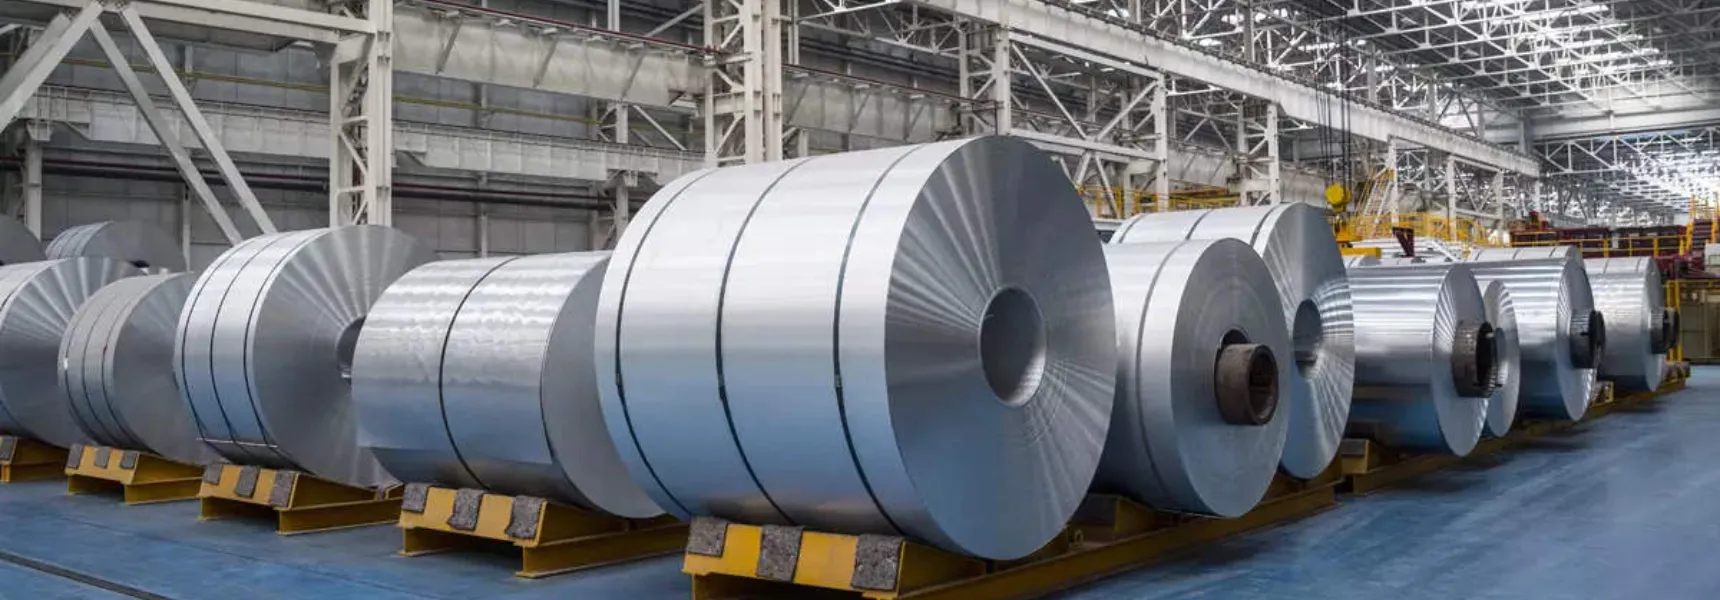 How to choose the best aluminum supplier in Africa?